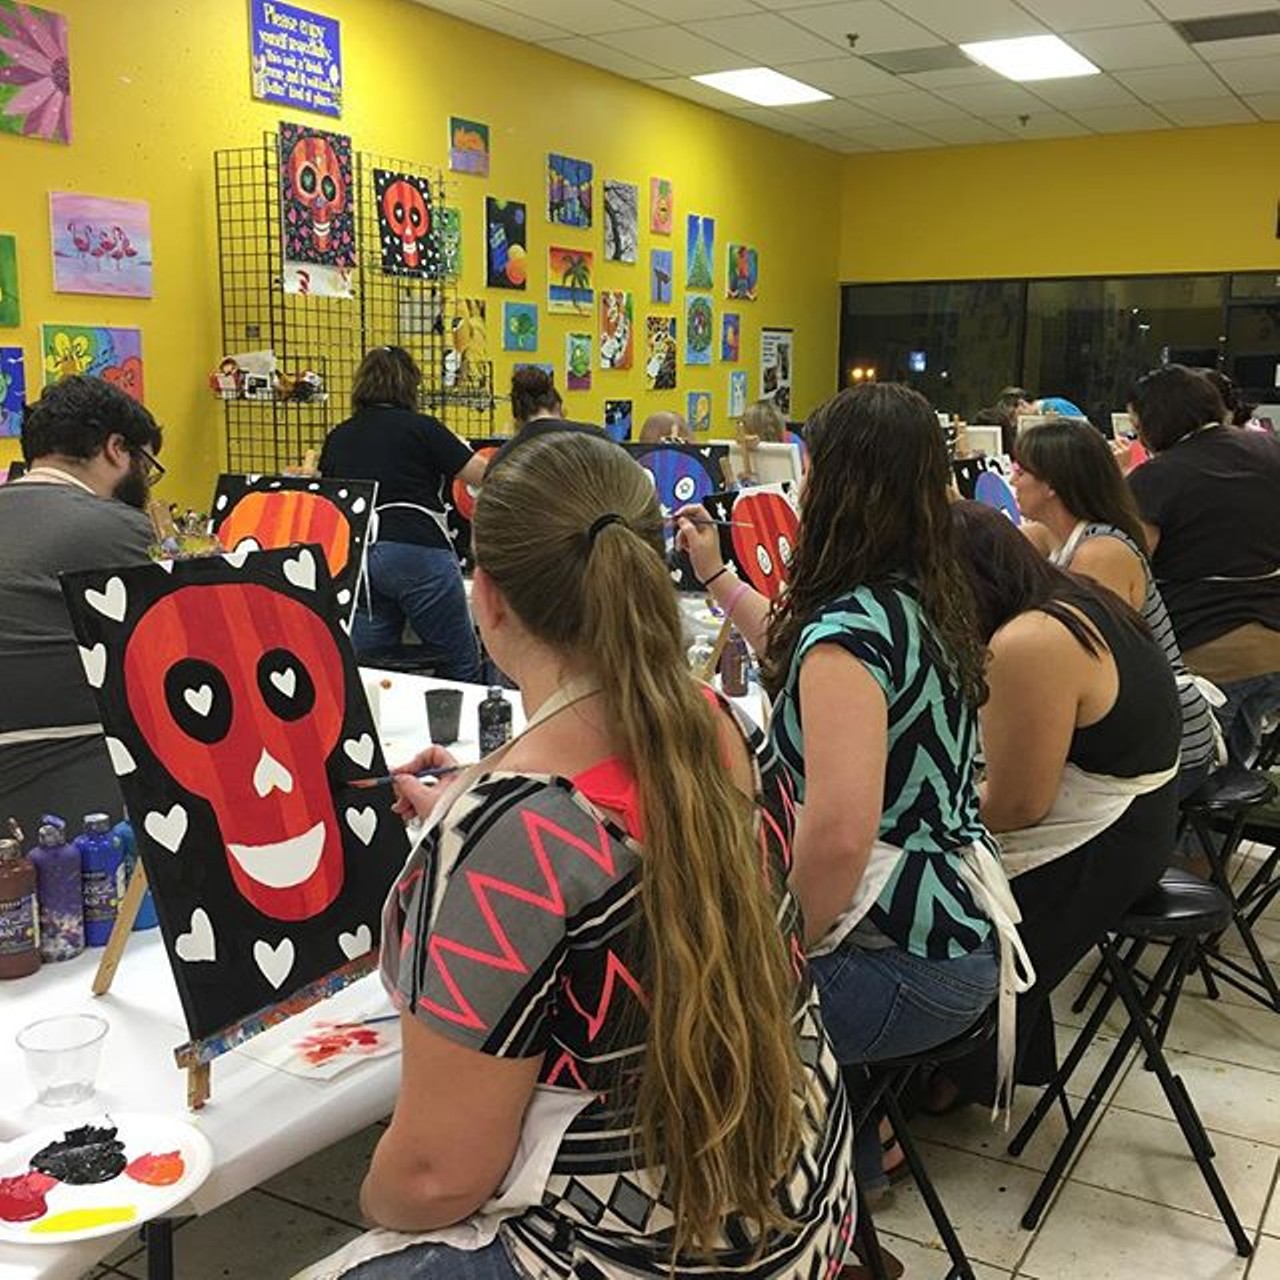 Paint and drink at Yes You Canvas 
1500 Alafaya Trail #1008, Oviedo, (407) 542-8969 
At Yes You Canvas, wine is encouraged while painting whatever comes to mind. If you&#146;re not great at painting, there are teachers present to help you cultivate your artistic talents. Classes go for around $20. 
Photo via ruthiecoursey/Instagram